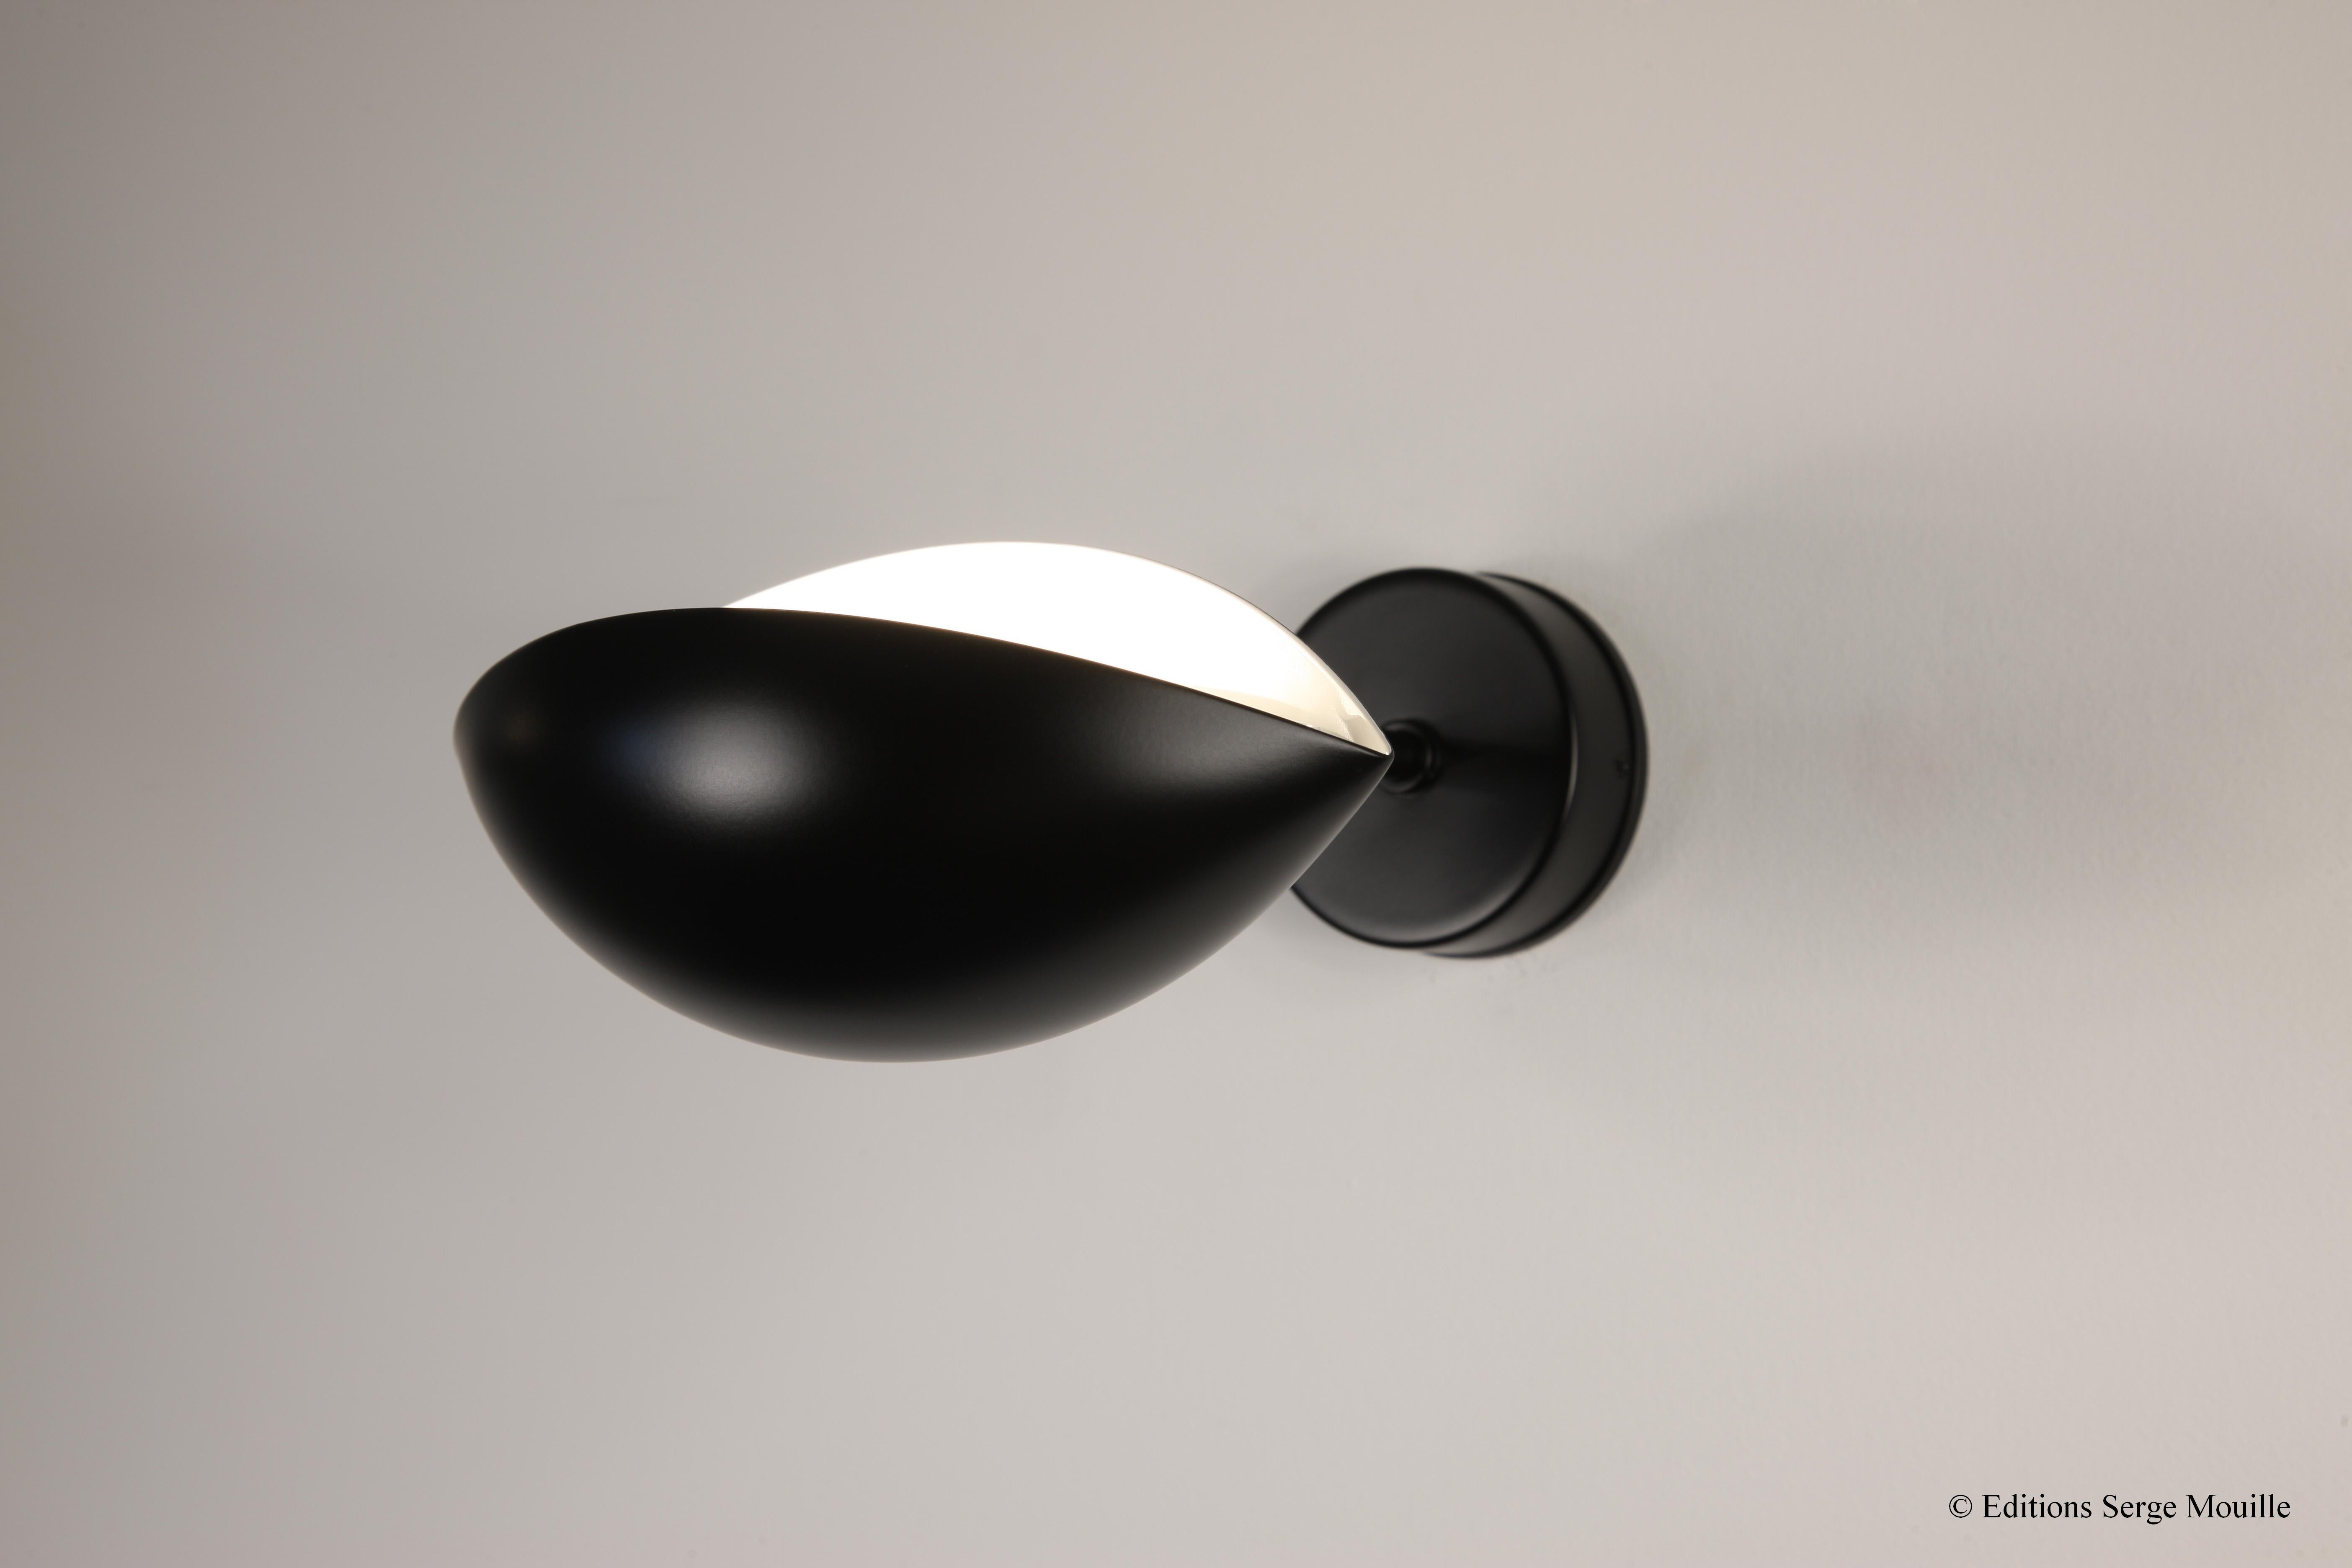 Serge Mouille 'Oeil' wall lamp in black.

Originally designed in 1956, this iconic wall sconce is still made by Edition Serge Mouille in France using many of the same small-scale manufacturing techniques and scrupulous attention to detail,